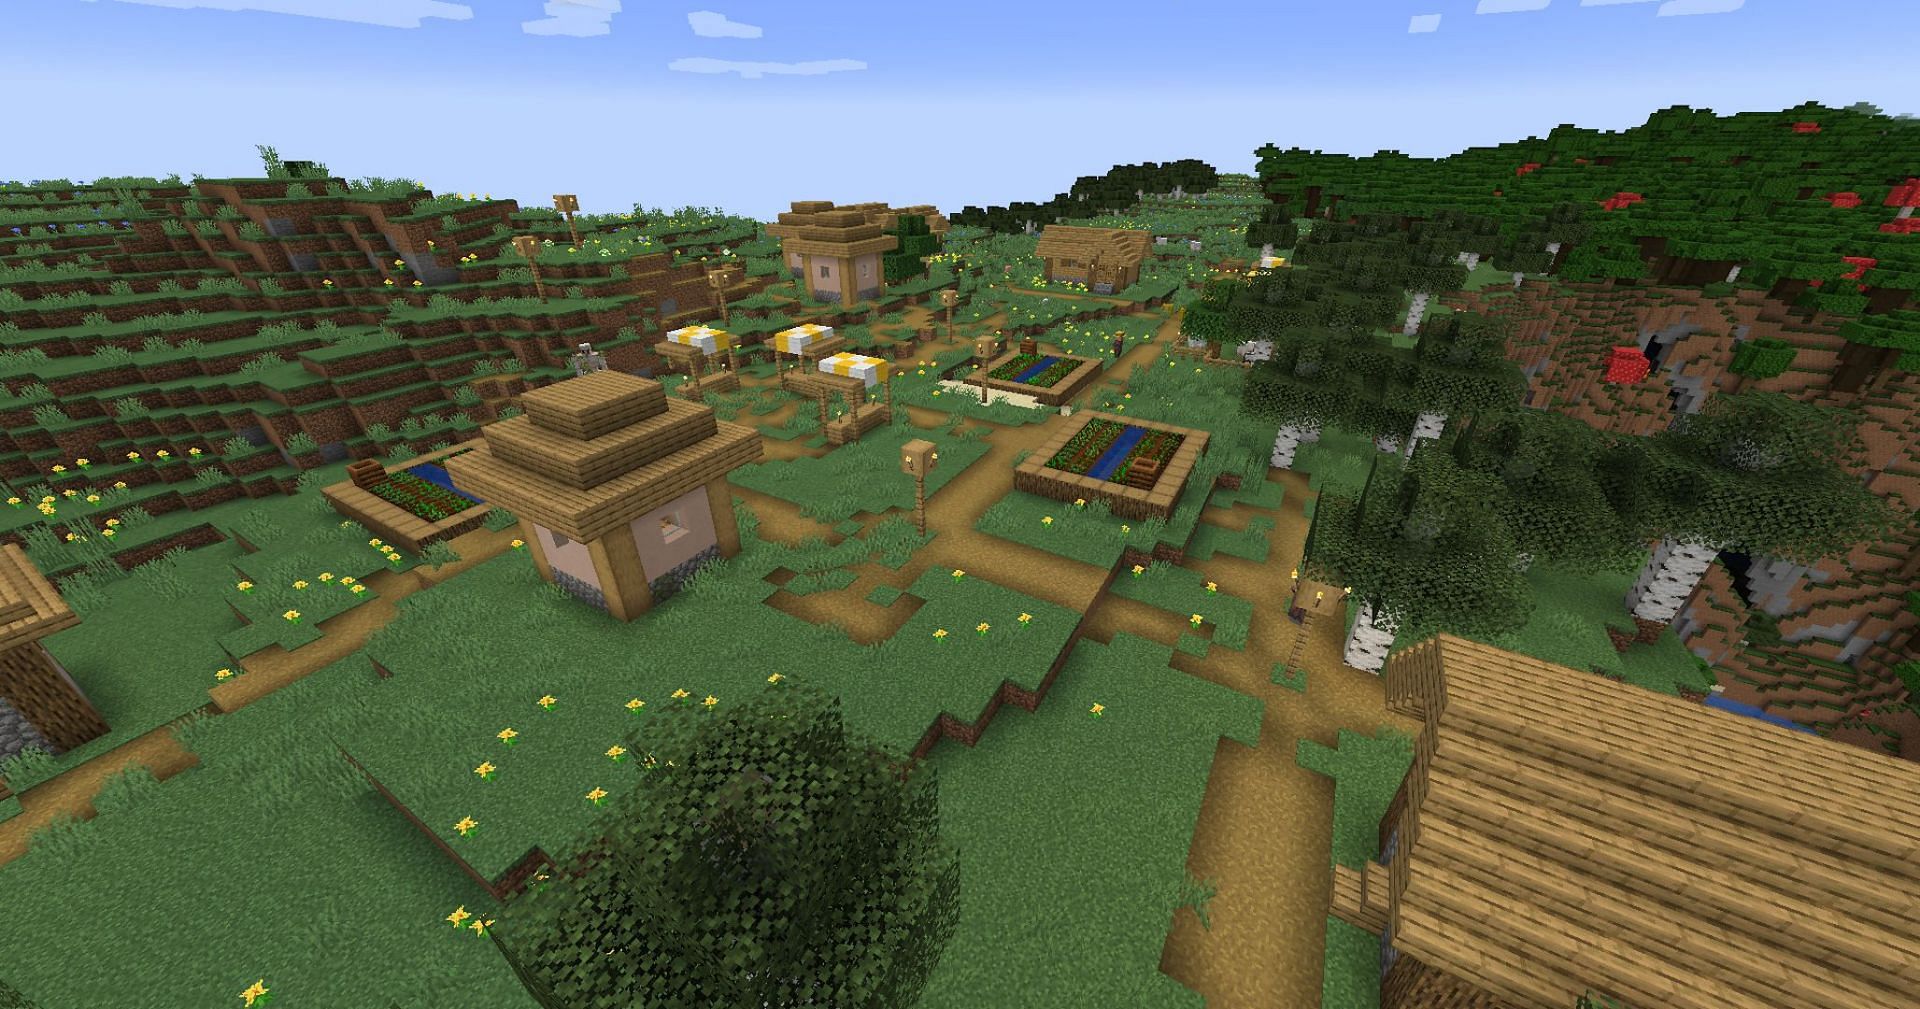 This village has both a stronghold and an ancient city beneath it (Image via Mojang)